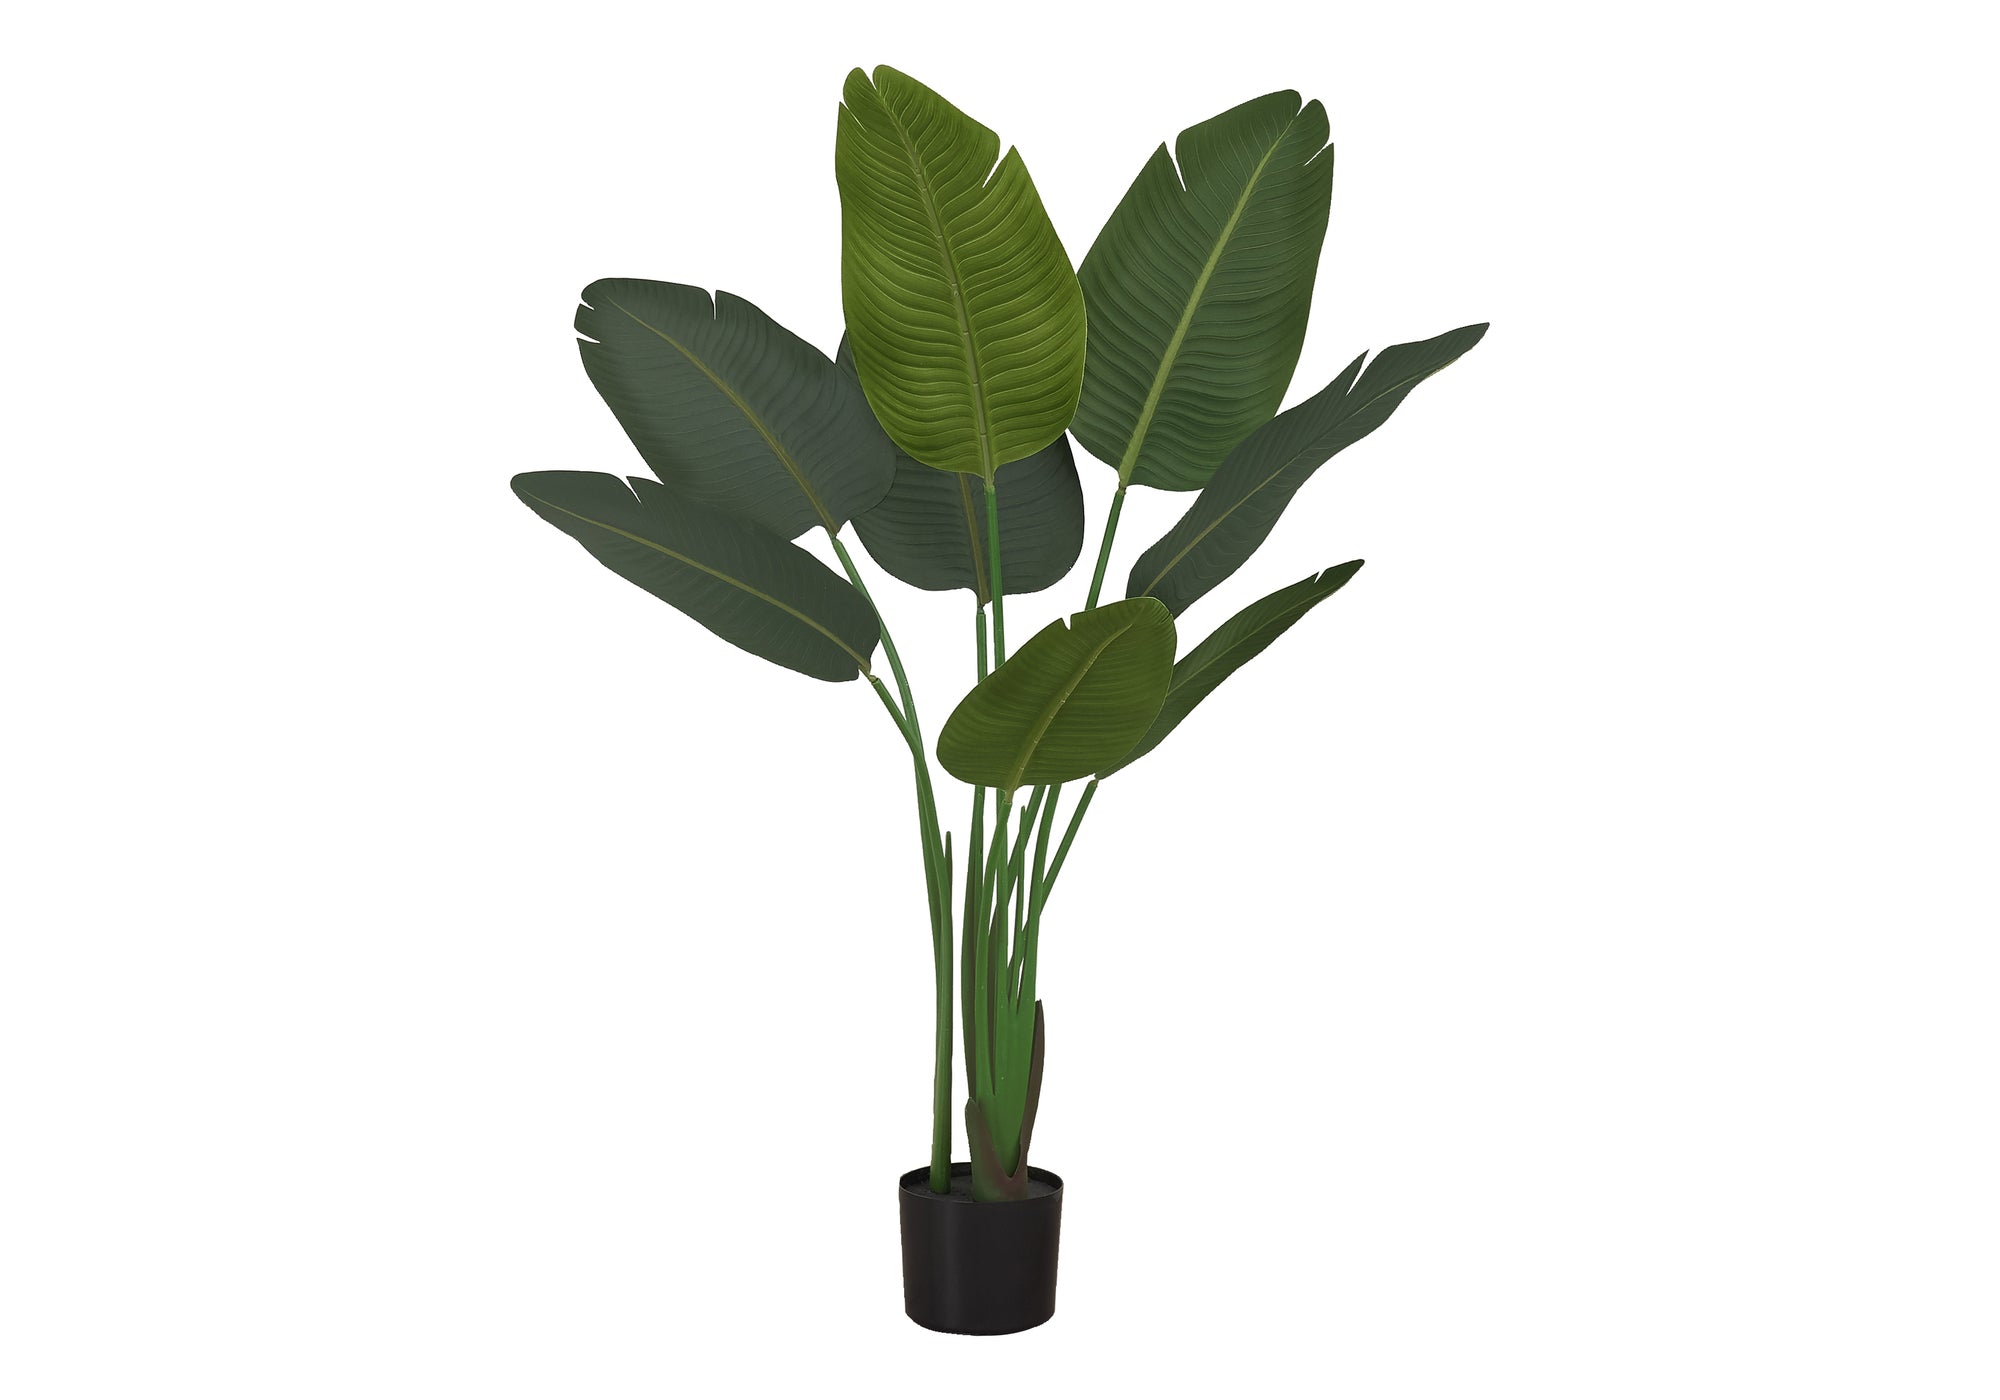 MN-619569    Artificial Plant, 44" Tall, Bird Of Paradise Tree, Indoor, Faux, Fake, Floor, Greenery, Potted, Decorative, Green Leaves, Black Pot